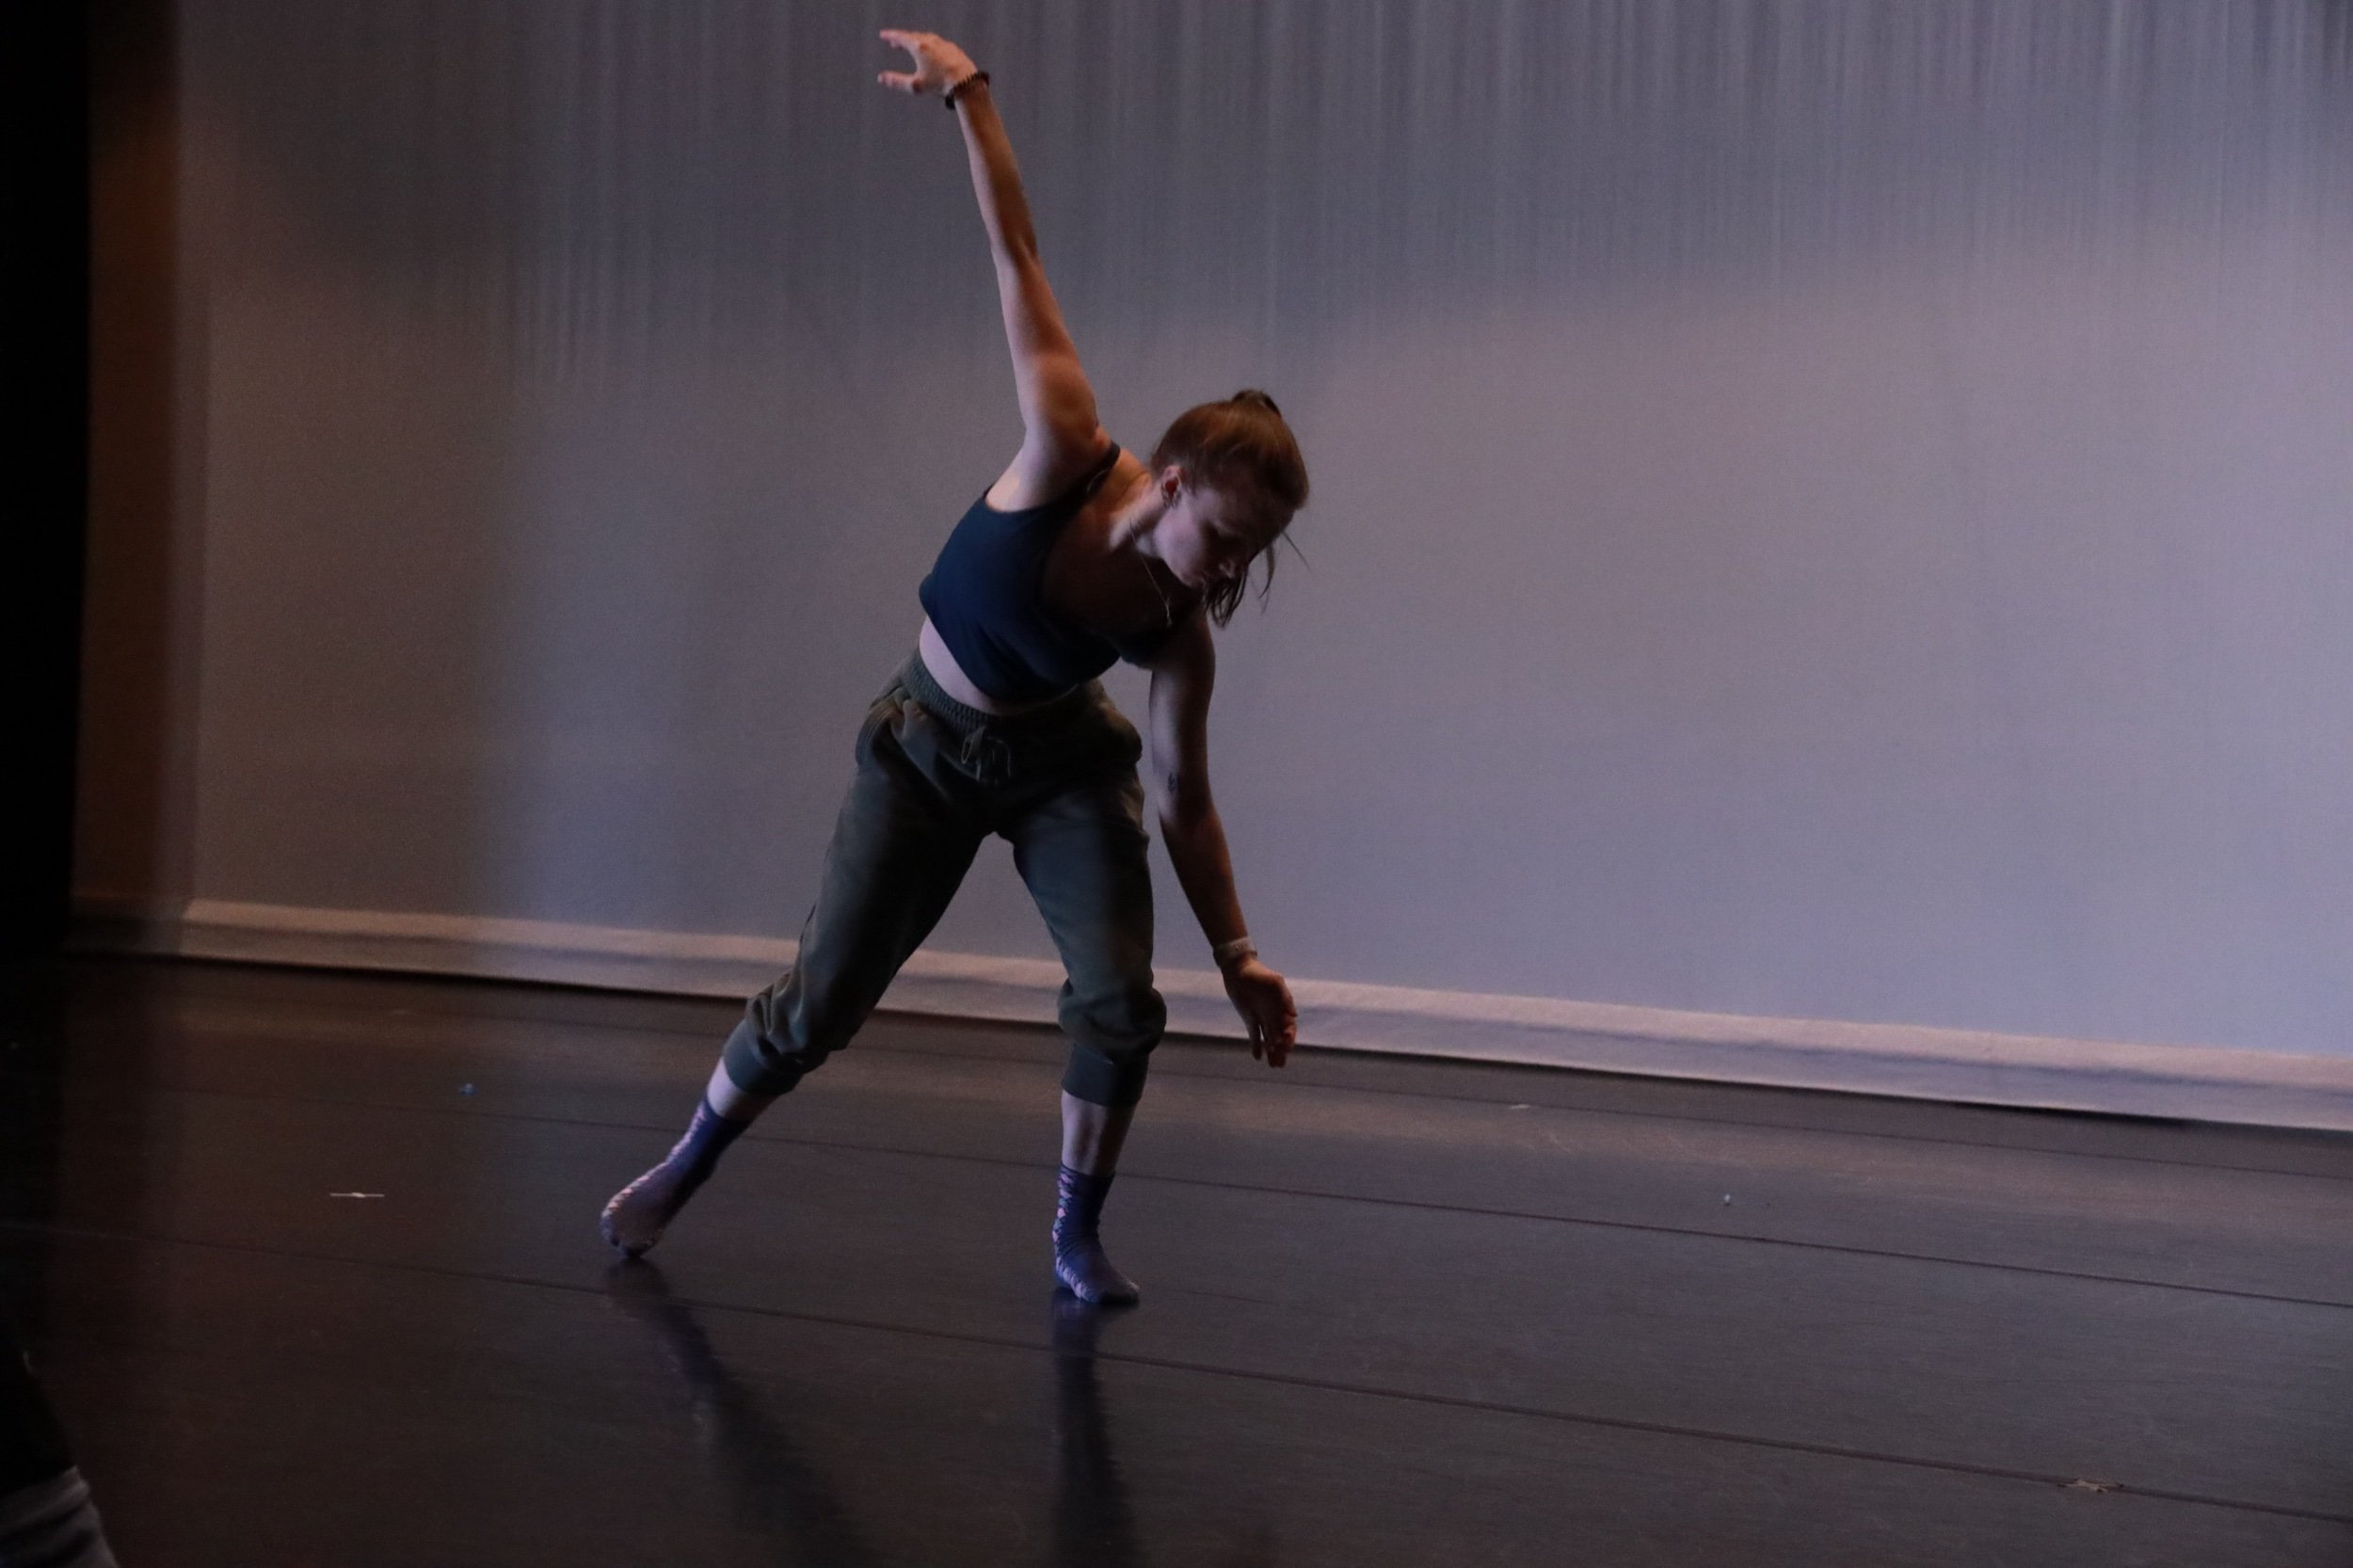 Emily in side left lunge arms extended outward vertically